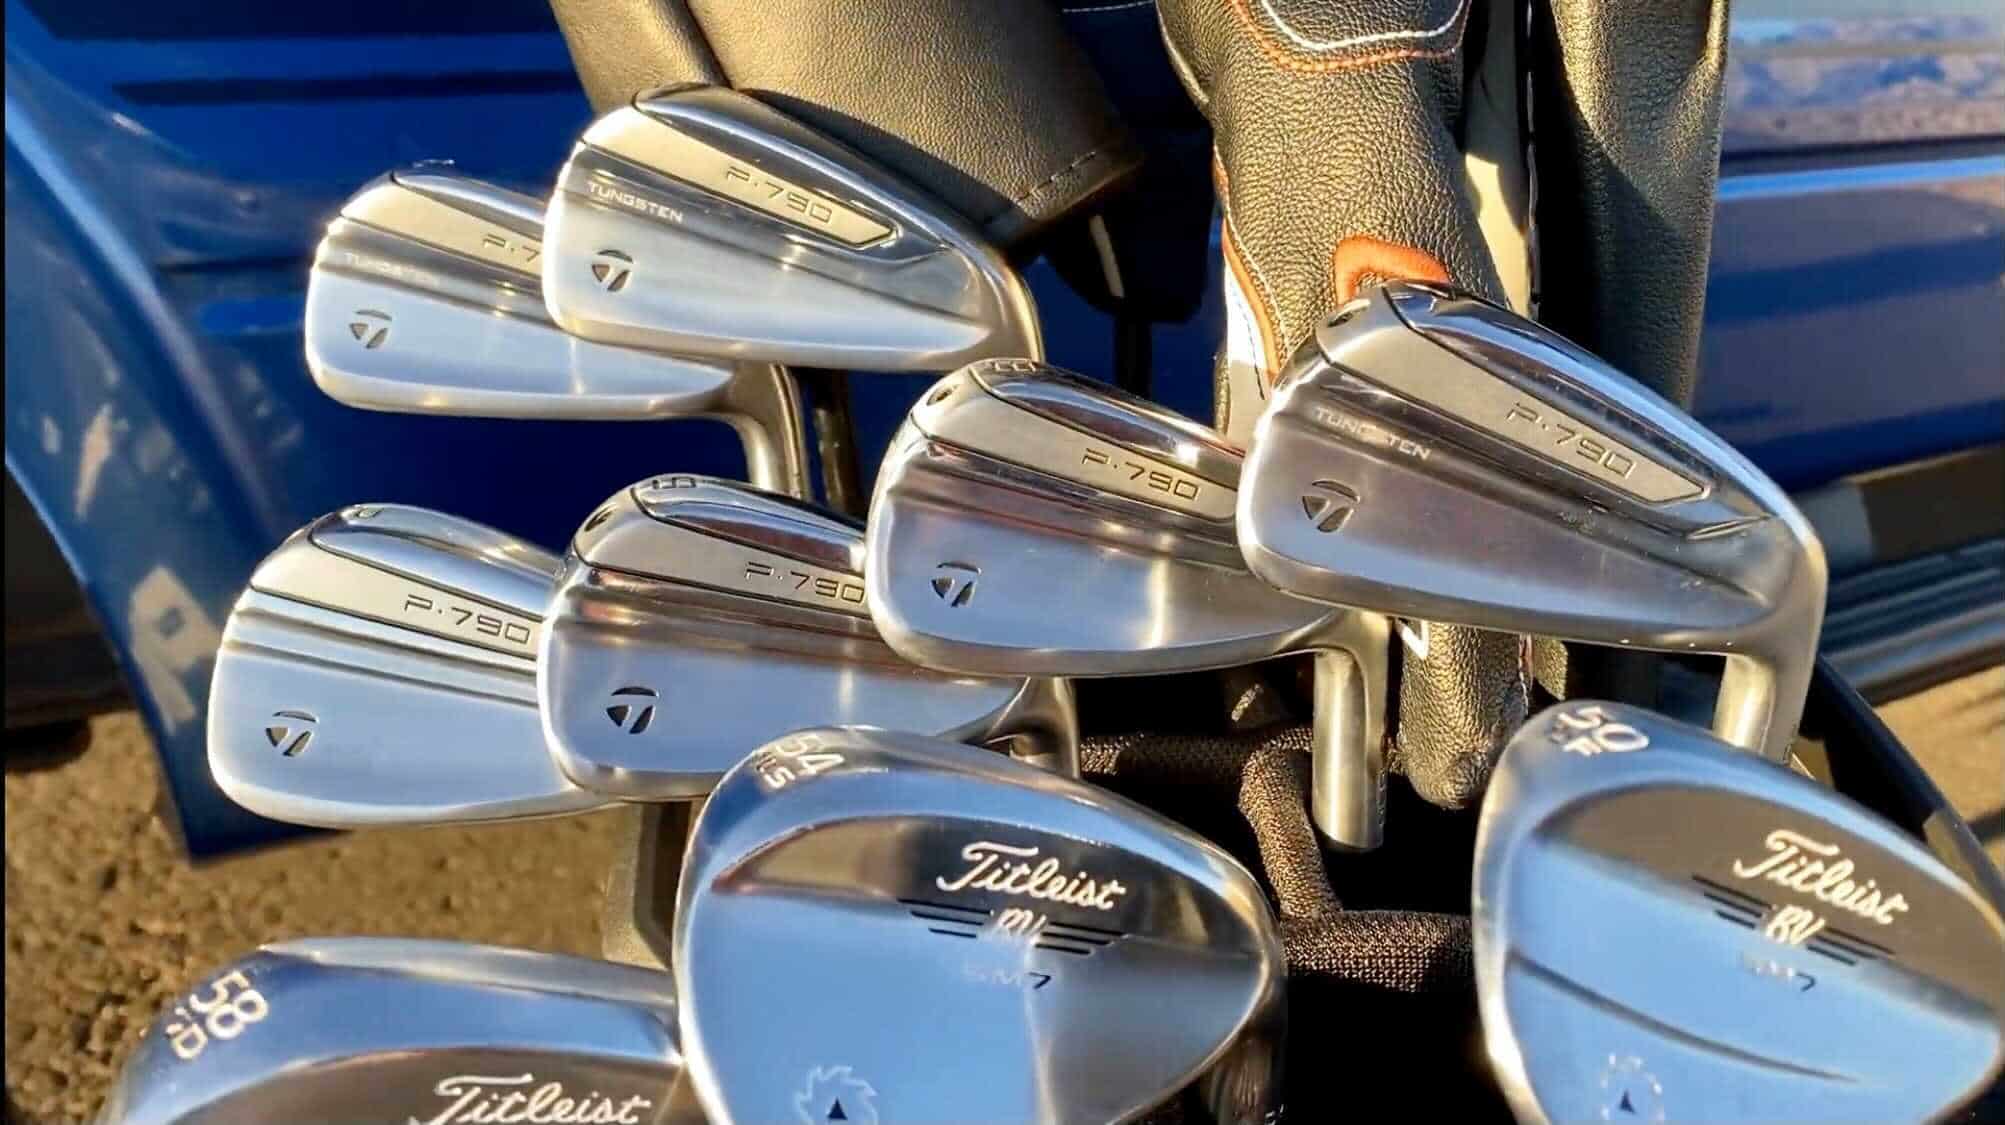 Set of p790 irons in golf bag